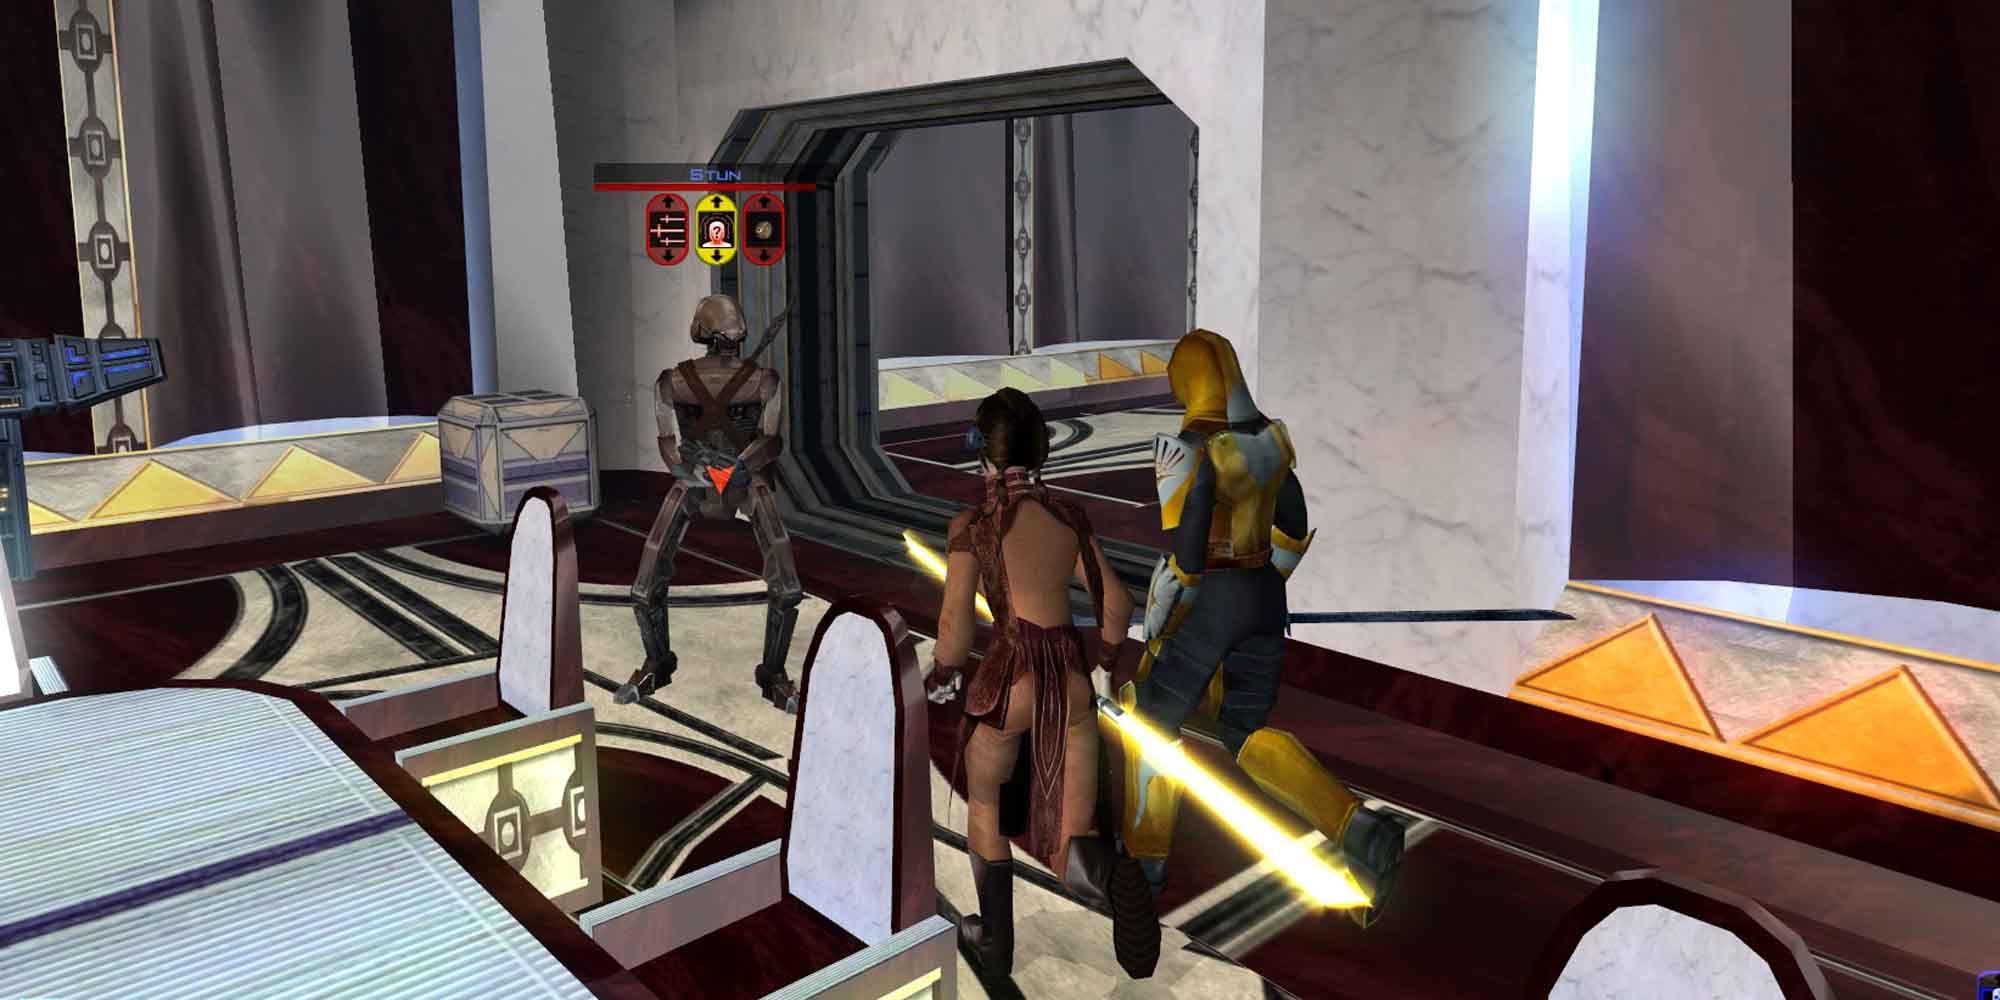 Fighting a droid in Star Wars: Knights of the Old Republic